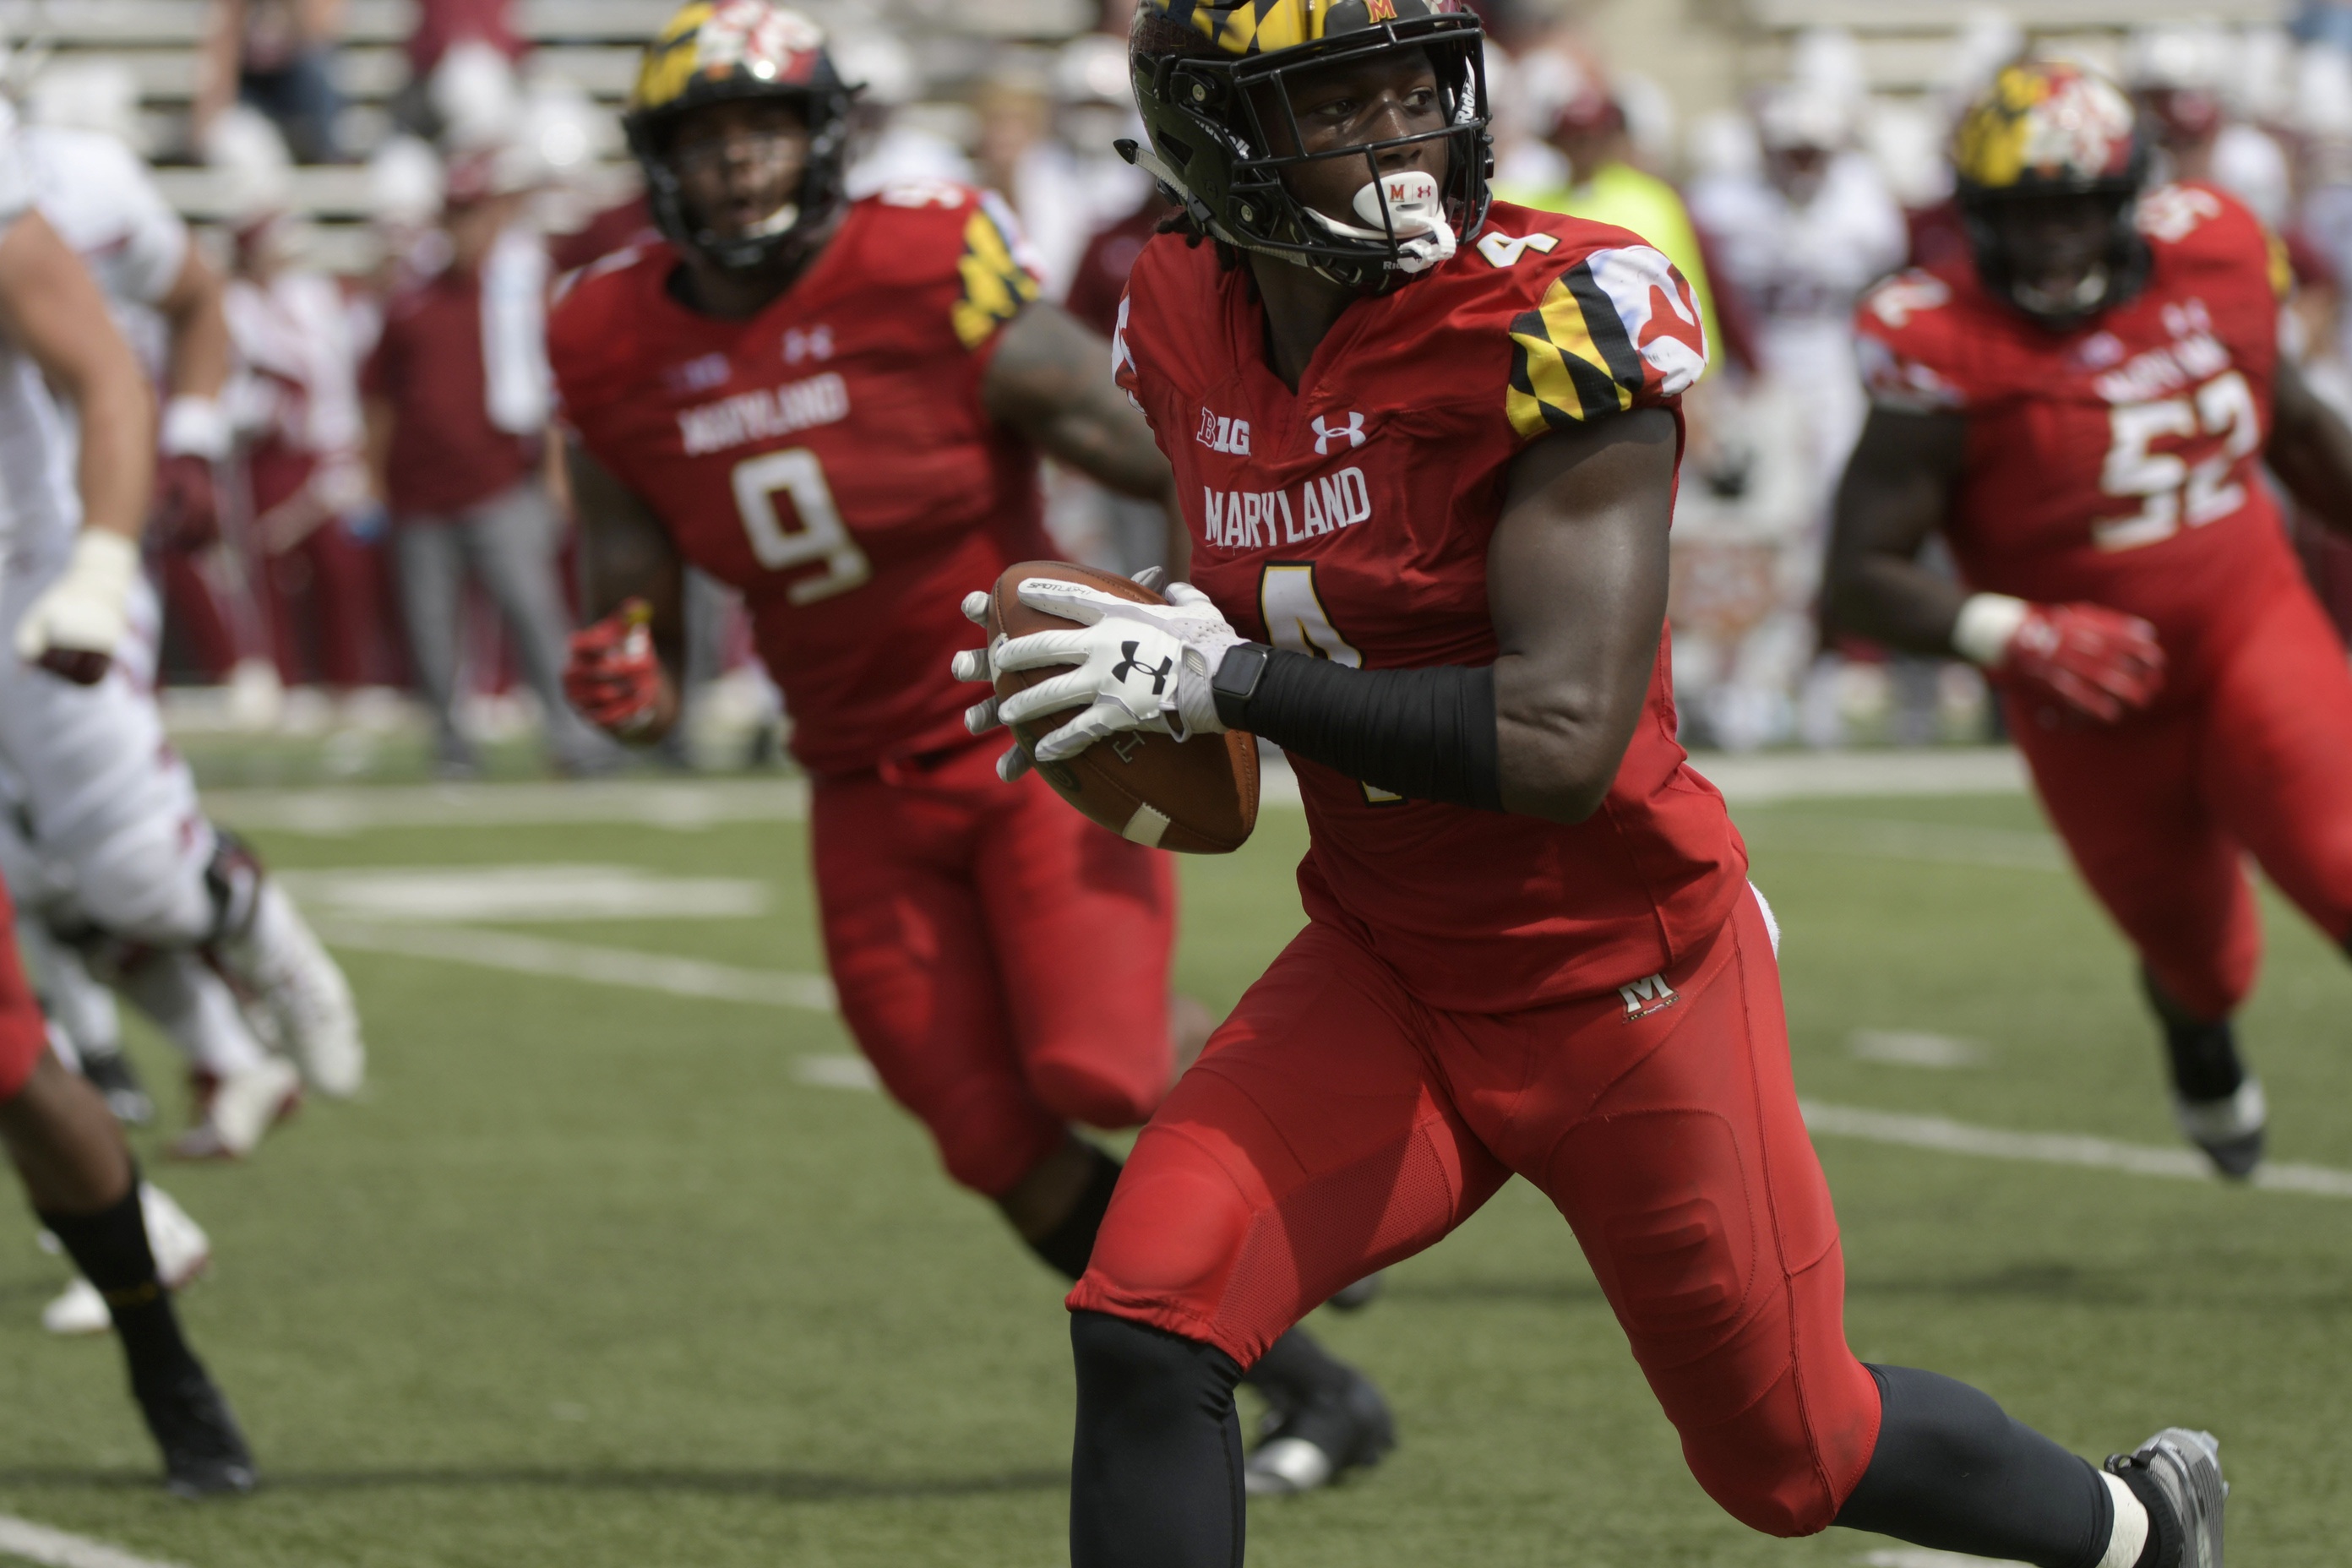 With impressive senior year and NFL combine, Maryland's Darnell Savage Jr.  has moved up draft boards